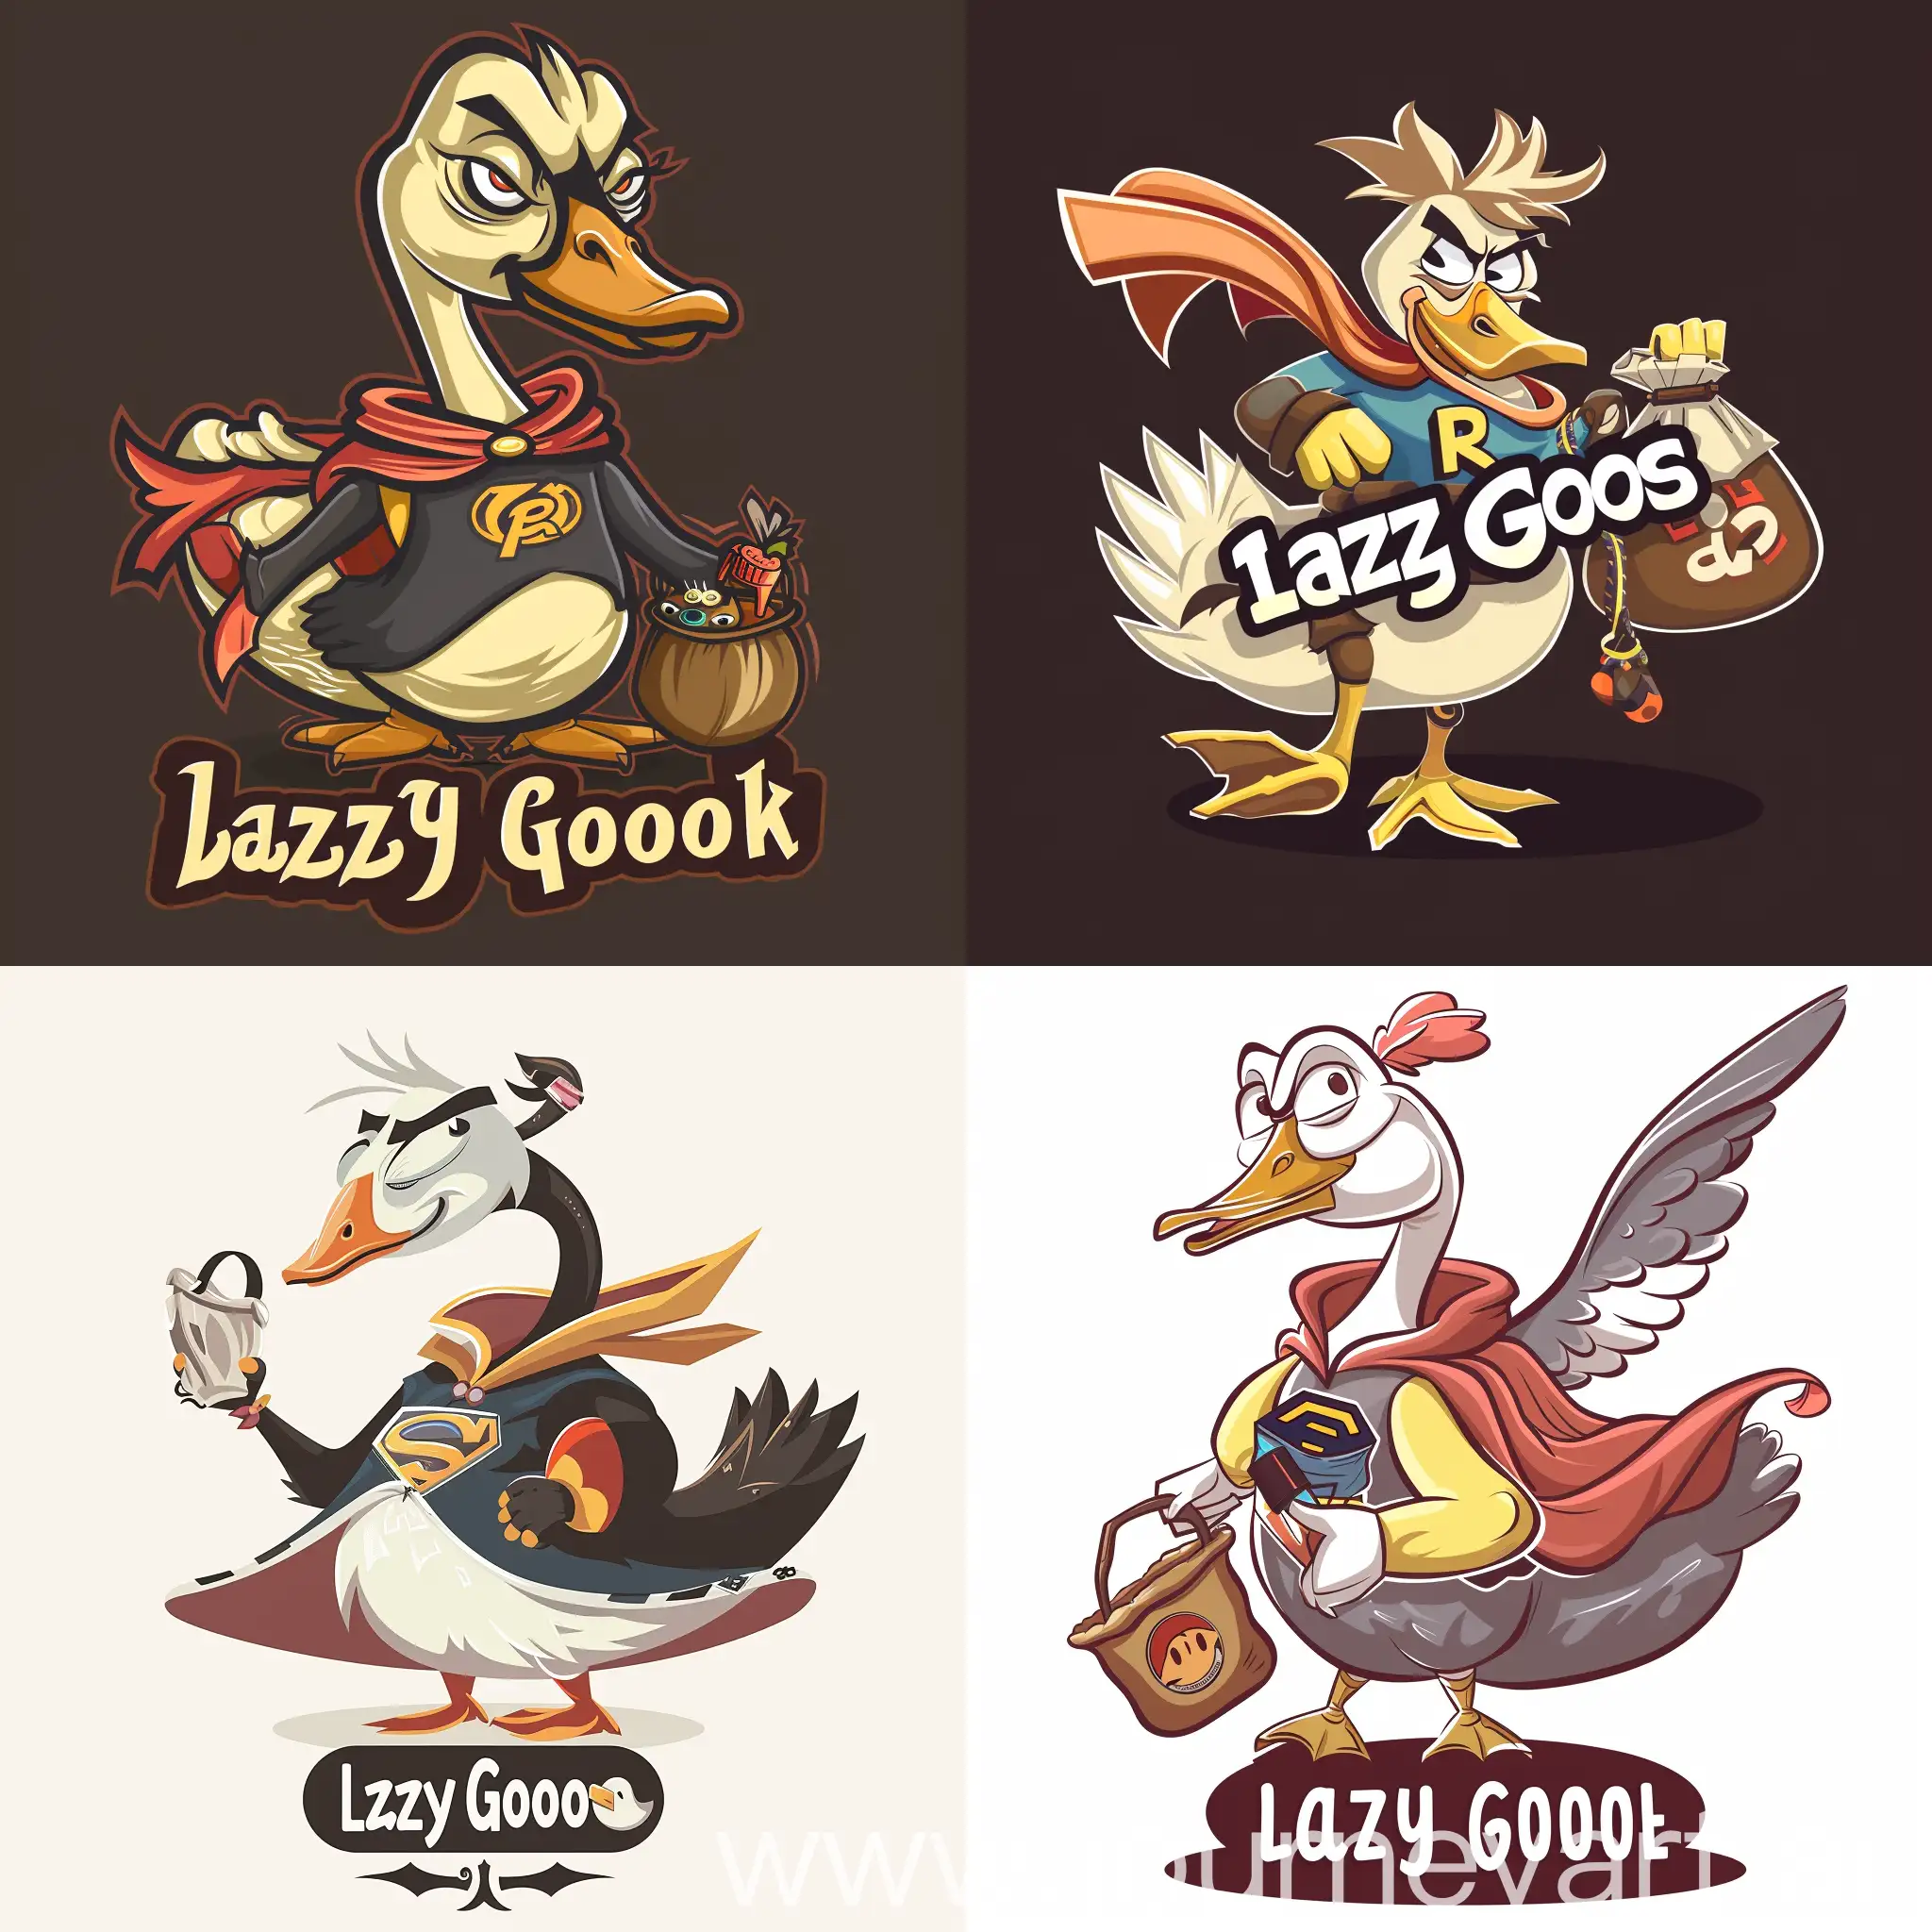 Produce a logo depicting a goofy goose with exaggerated features, wearing a superhero costume, and holding a bag of tricks, with 'Lazy Goose' written in a fun, quirky font